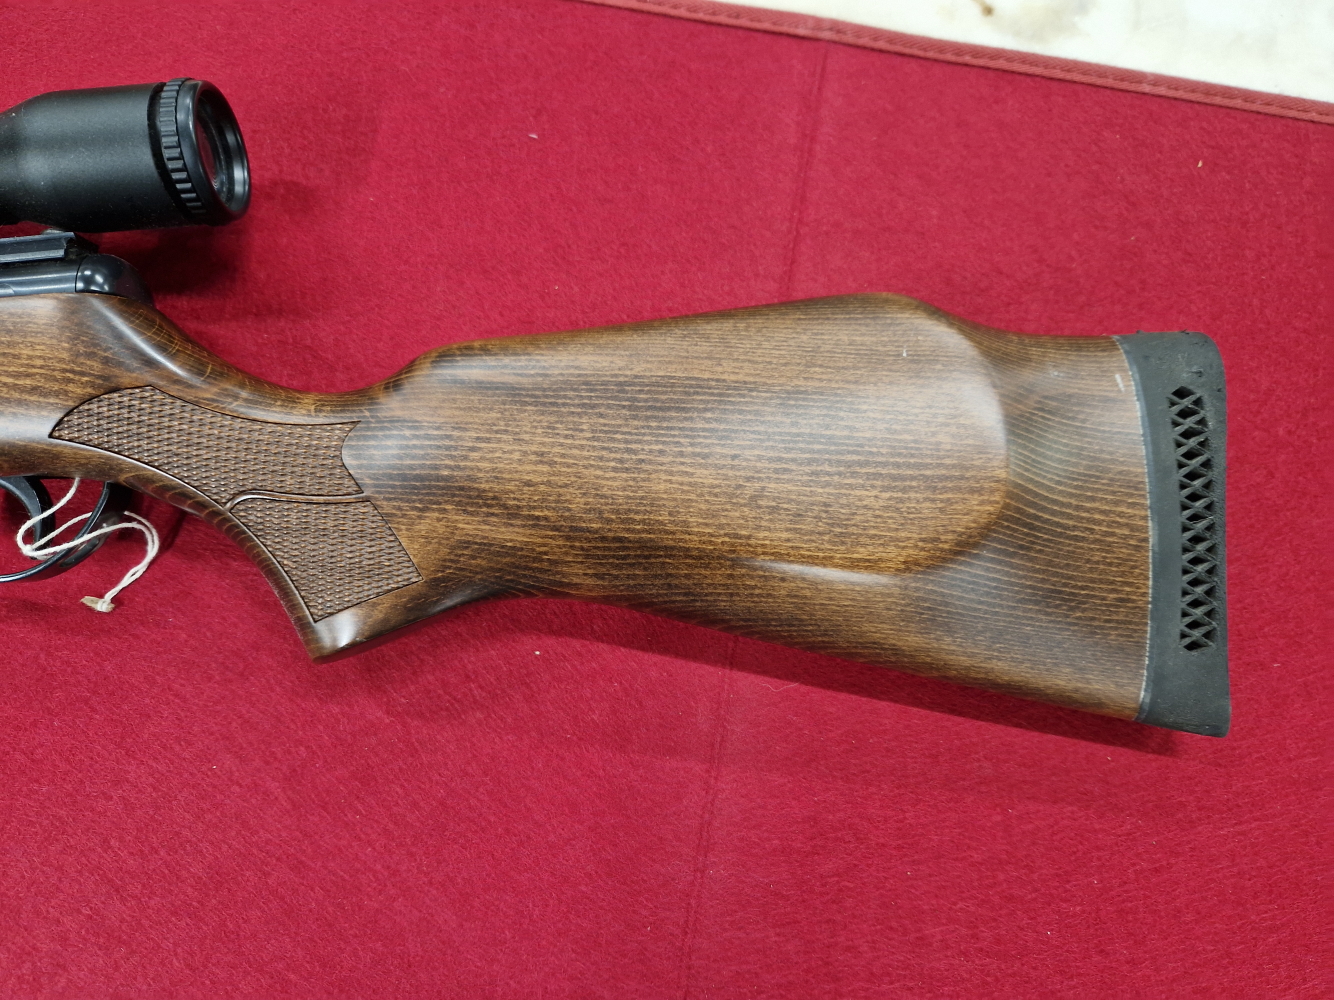 AIRGUN- A BSA LIGHTNING .22 BREAK BARREL AIR RIFLE SERIAL NUMBER 861121. FITTED WITH A HAWK 4 X 32 - Image 2 of 9